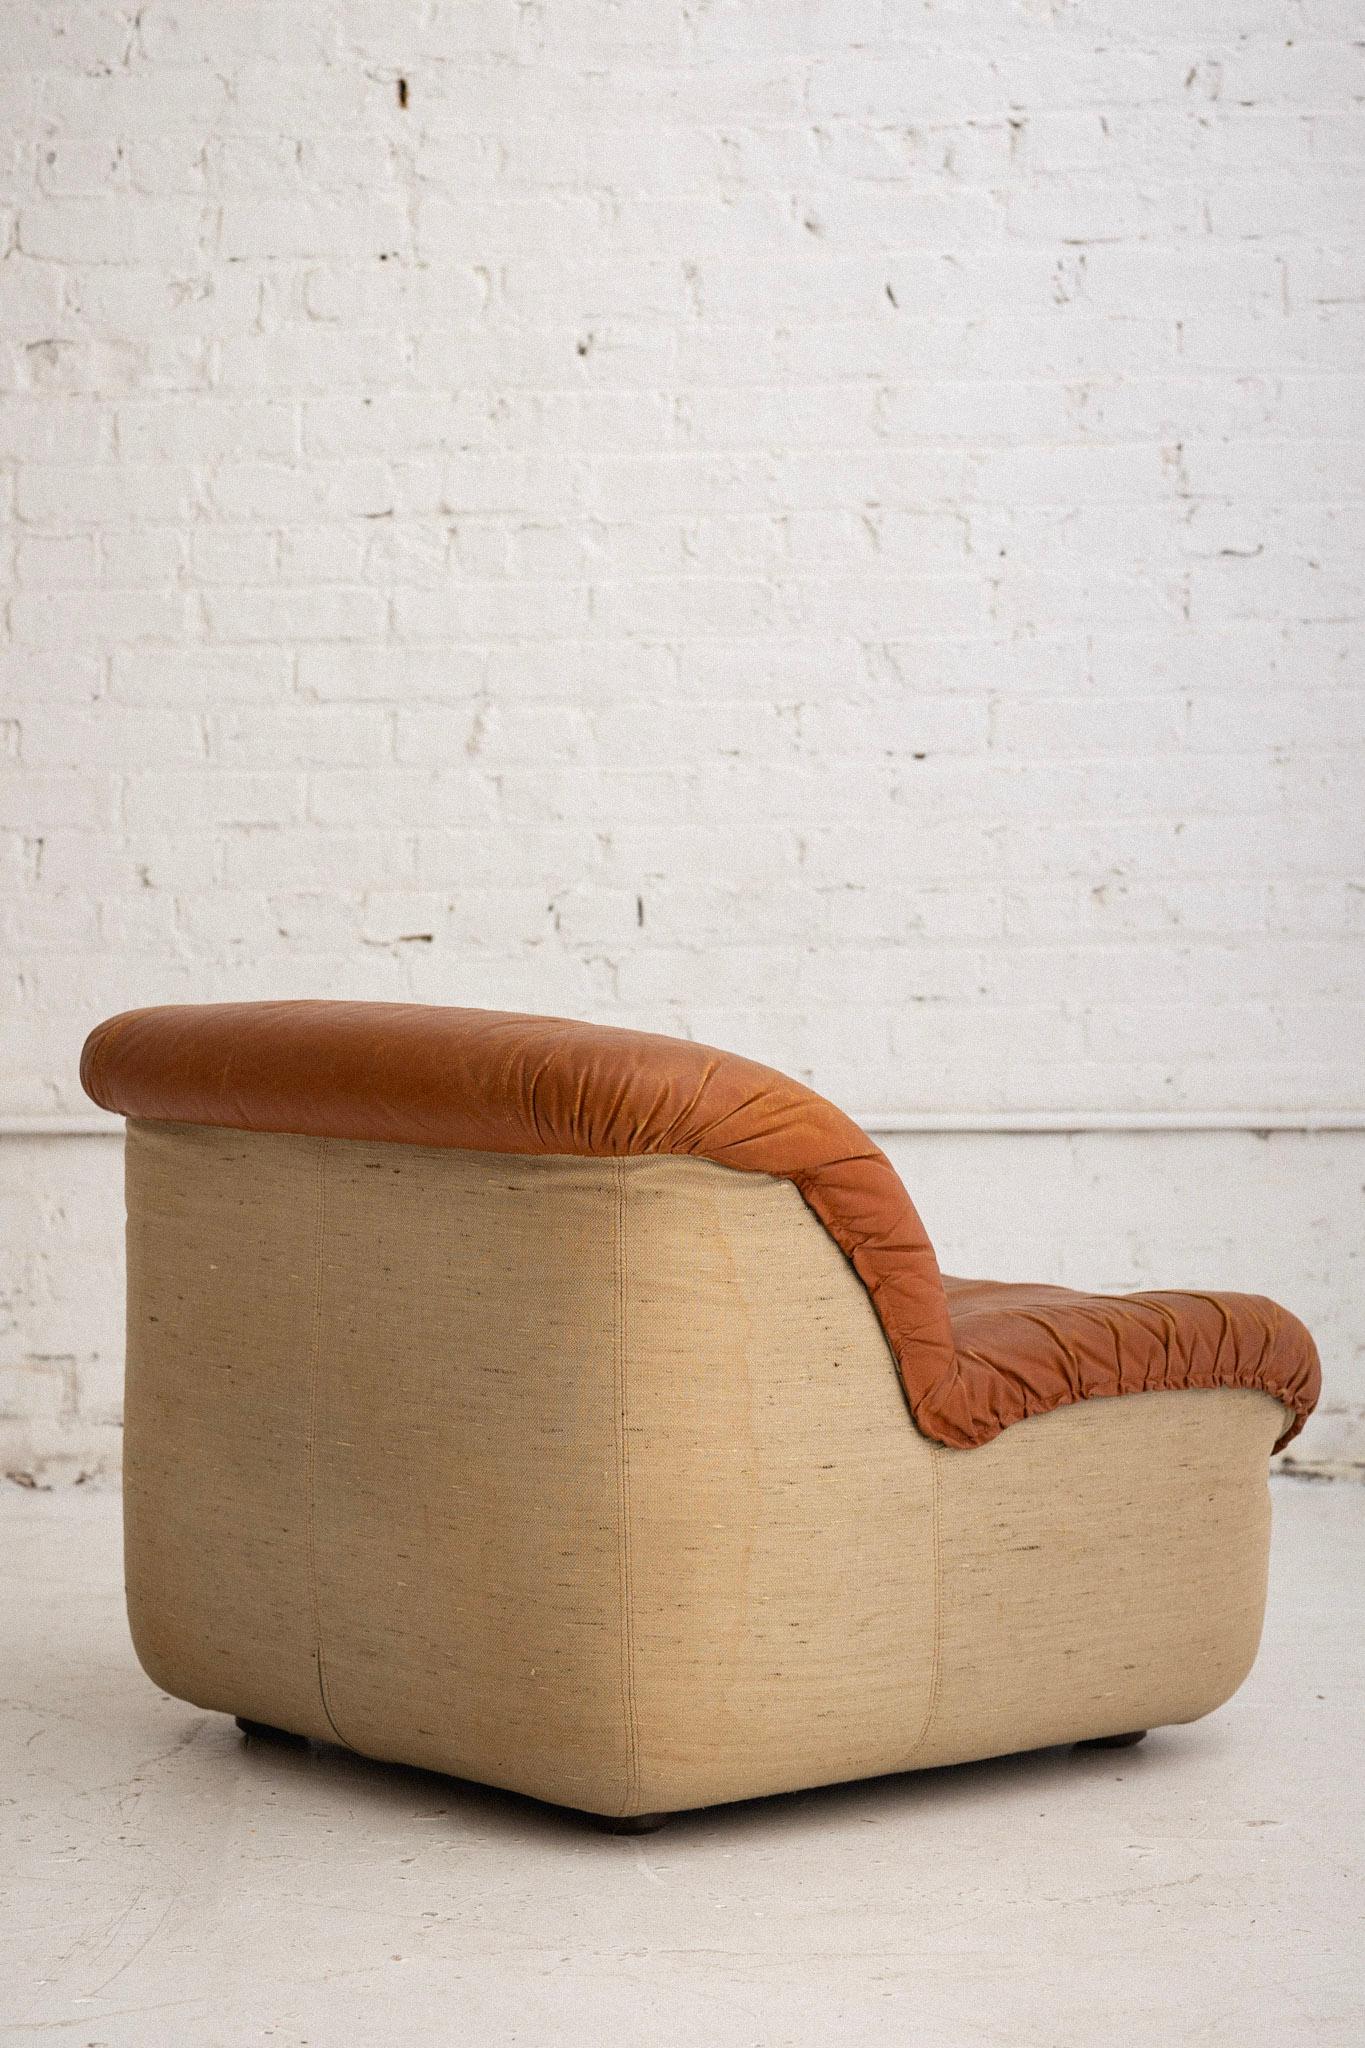 Space Age Henning Korch for Swan ‘Caprice’ Leather Chair / Modular Seating For Sale